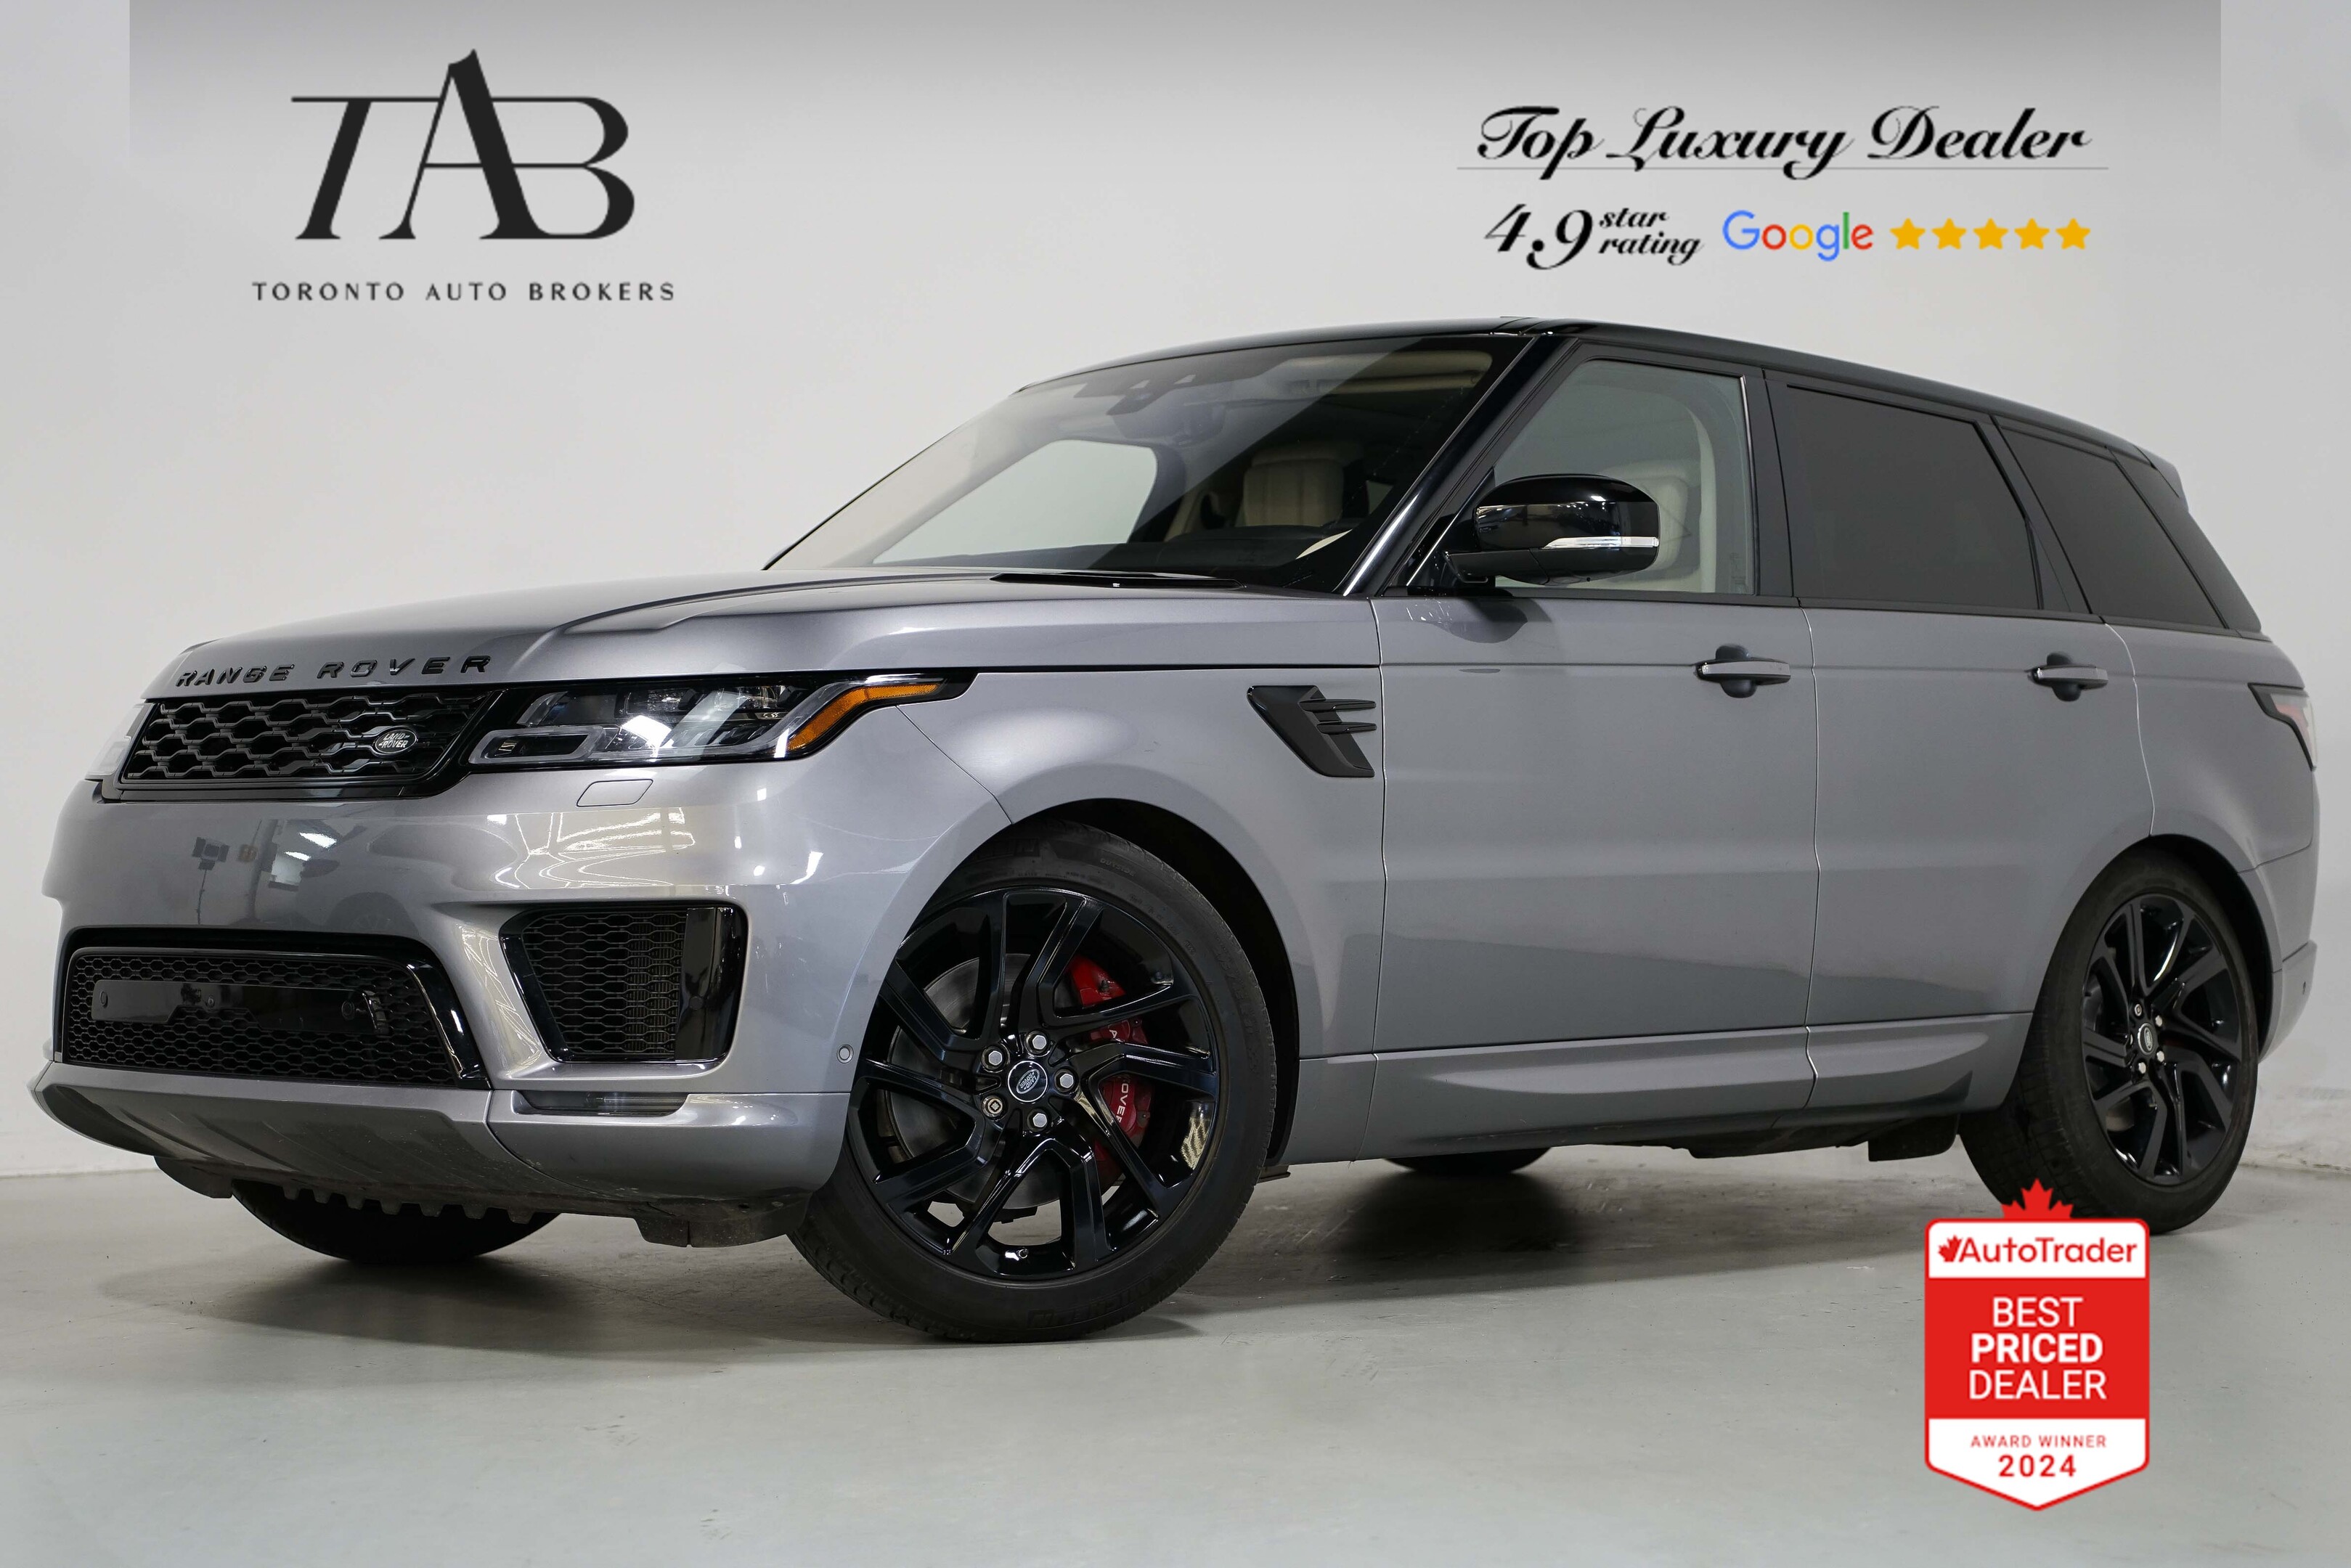 2020 Land Rover Range Rover Sport P400E PLUG IN HYBRID AUTOBIOGRAPHY | 21 IN WHEELS